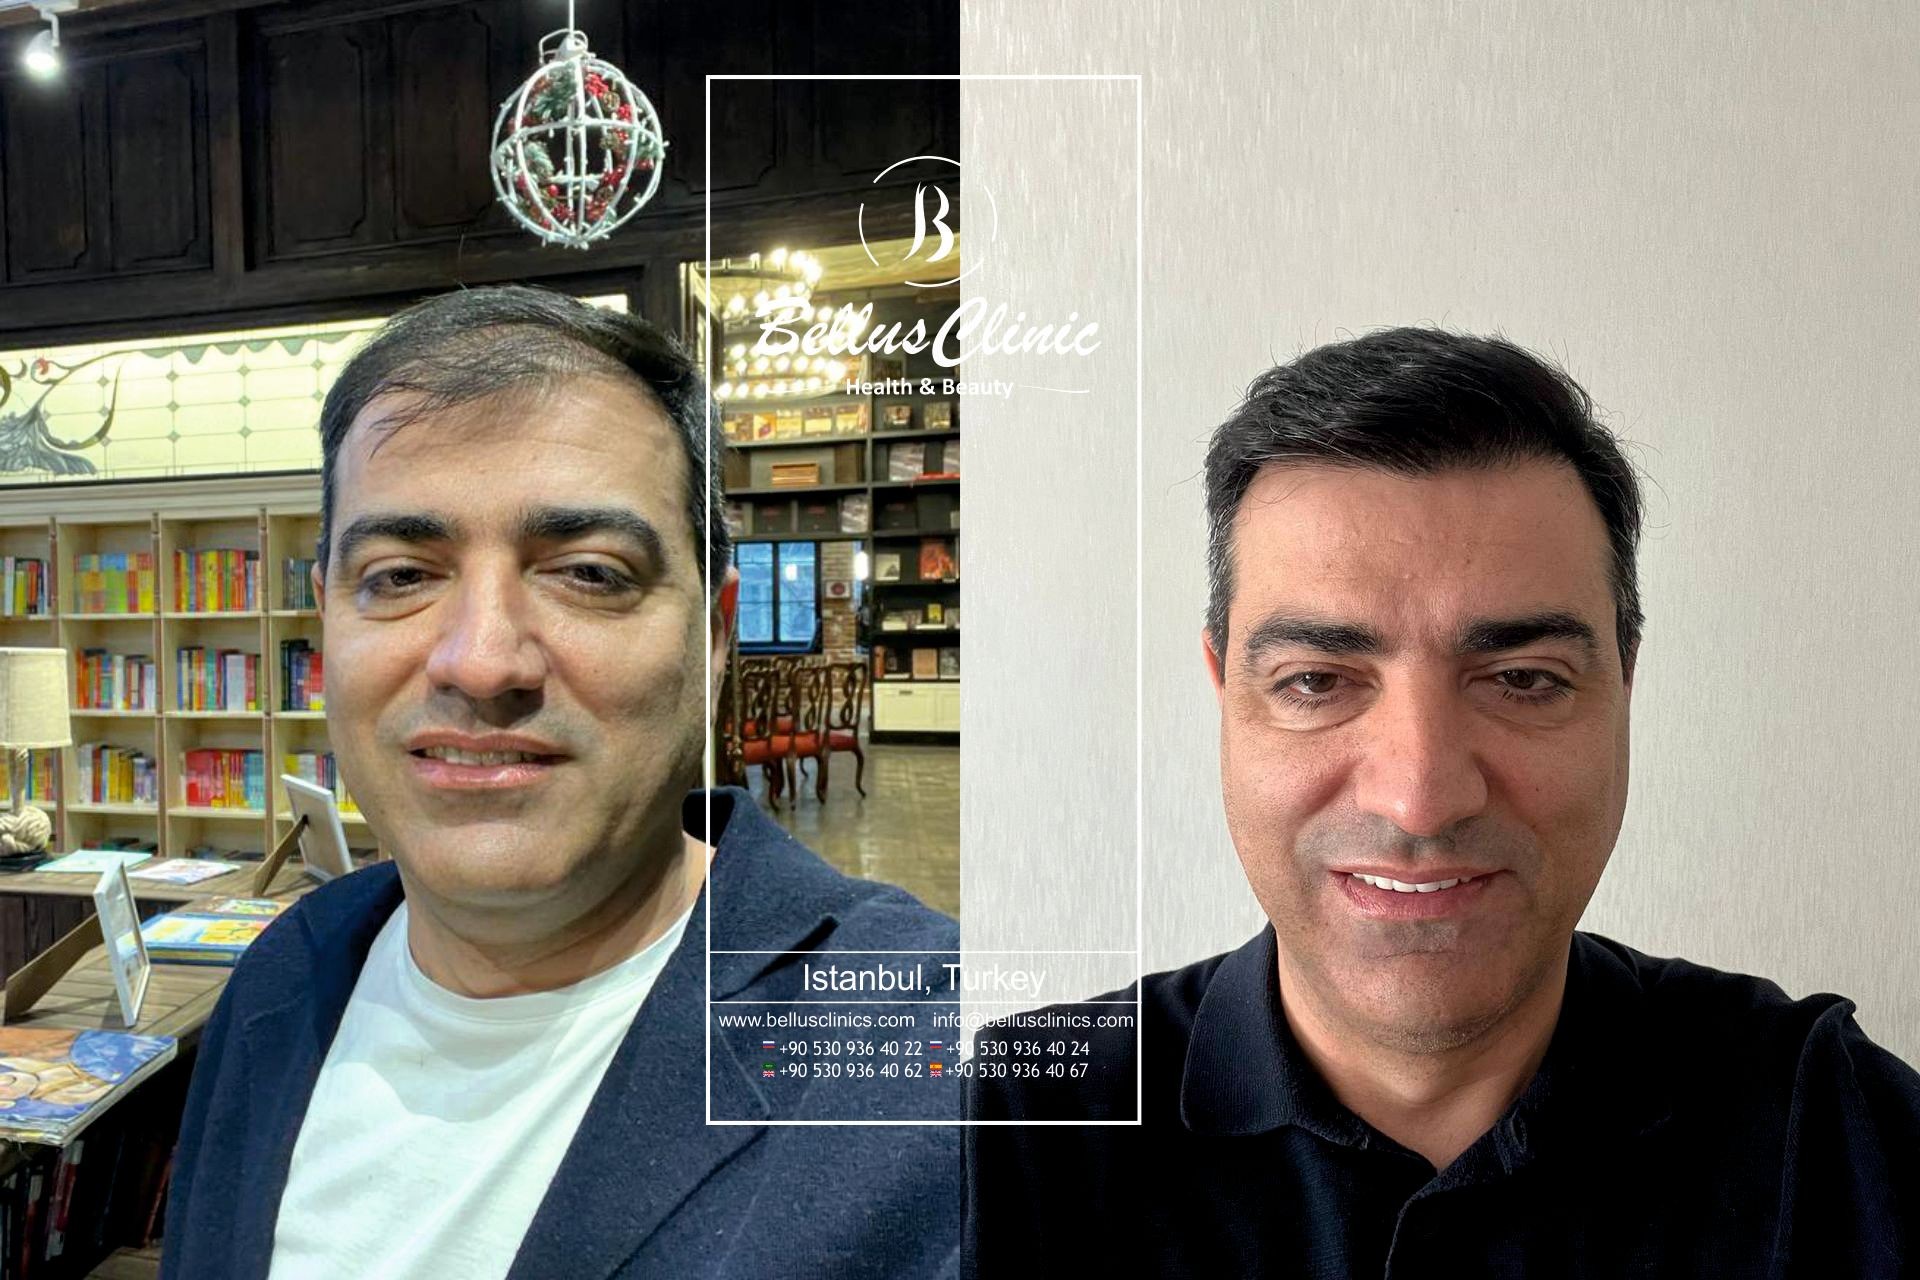 Hair transformation hair transplant before and after